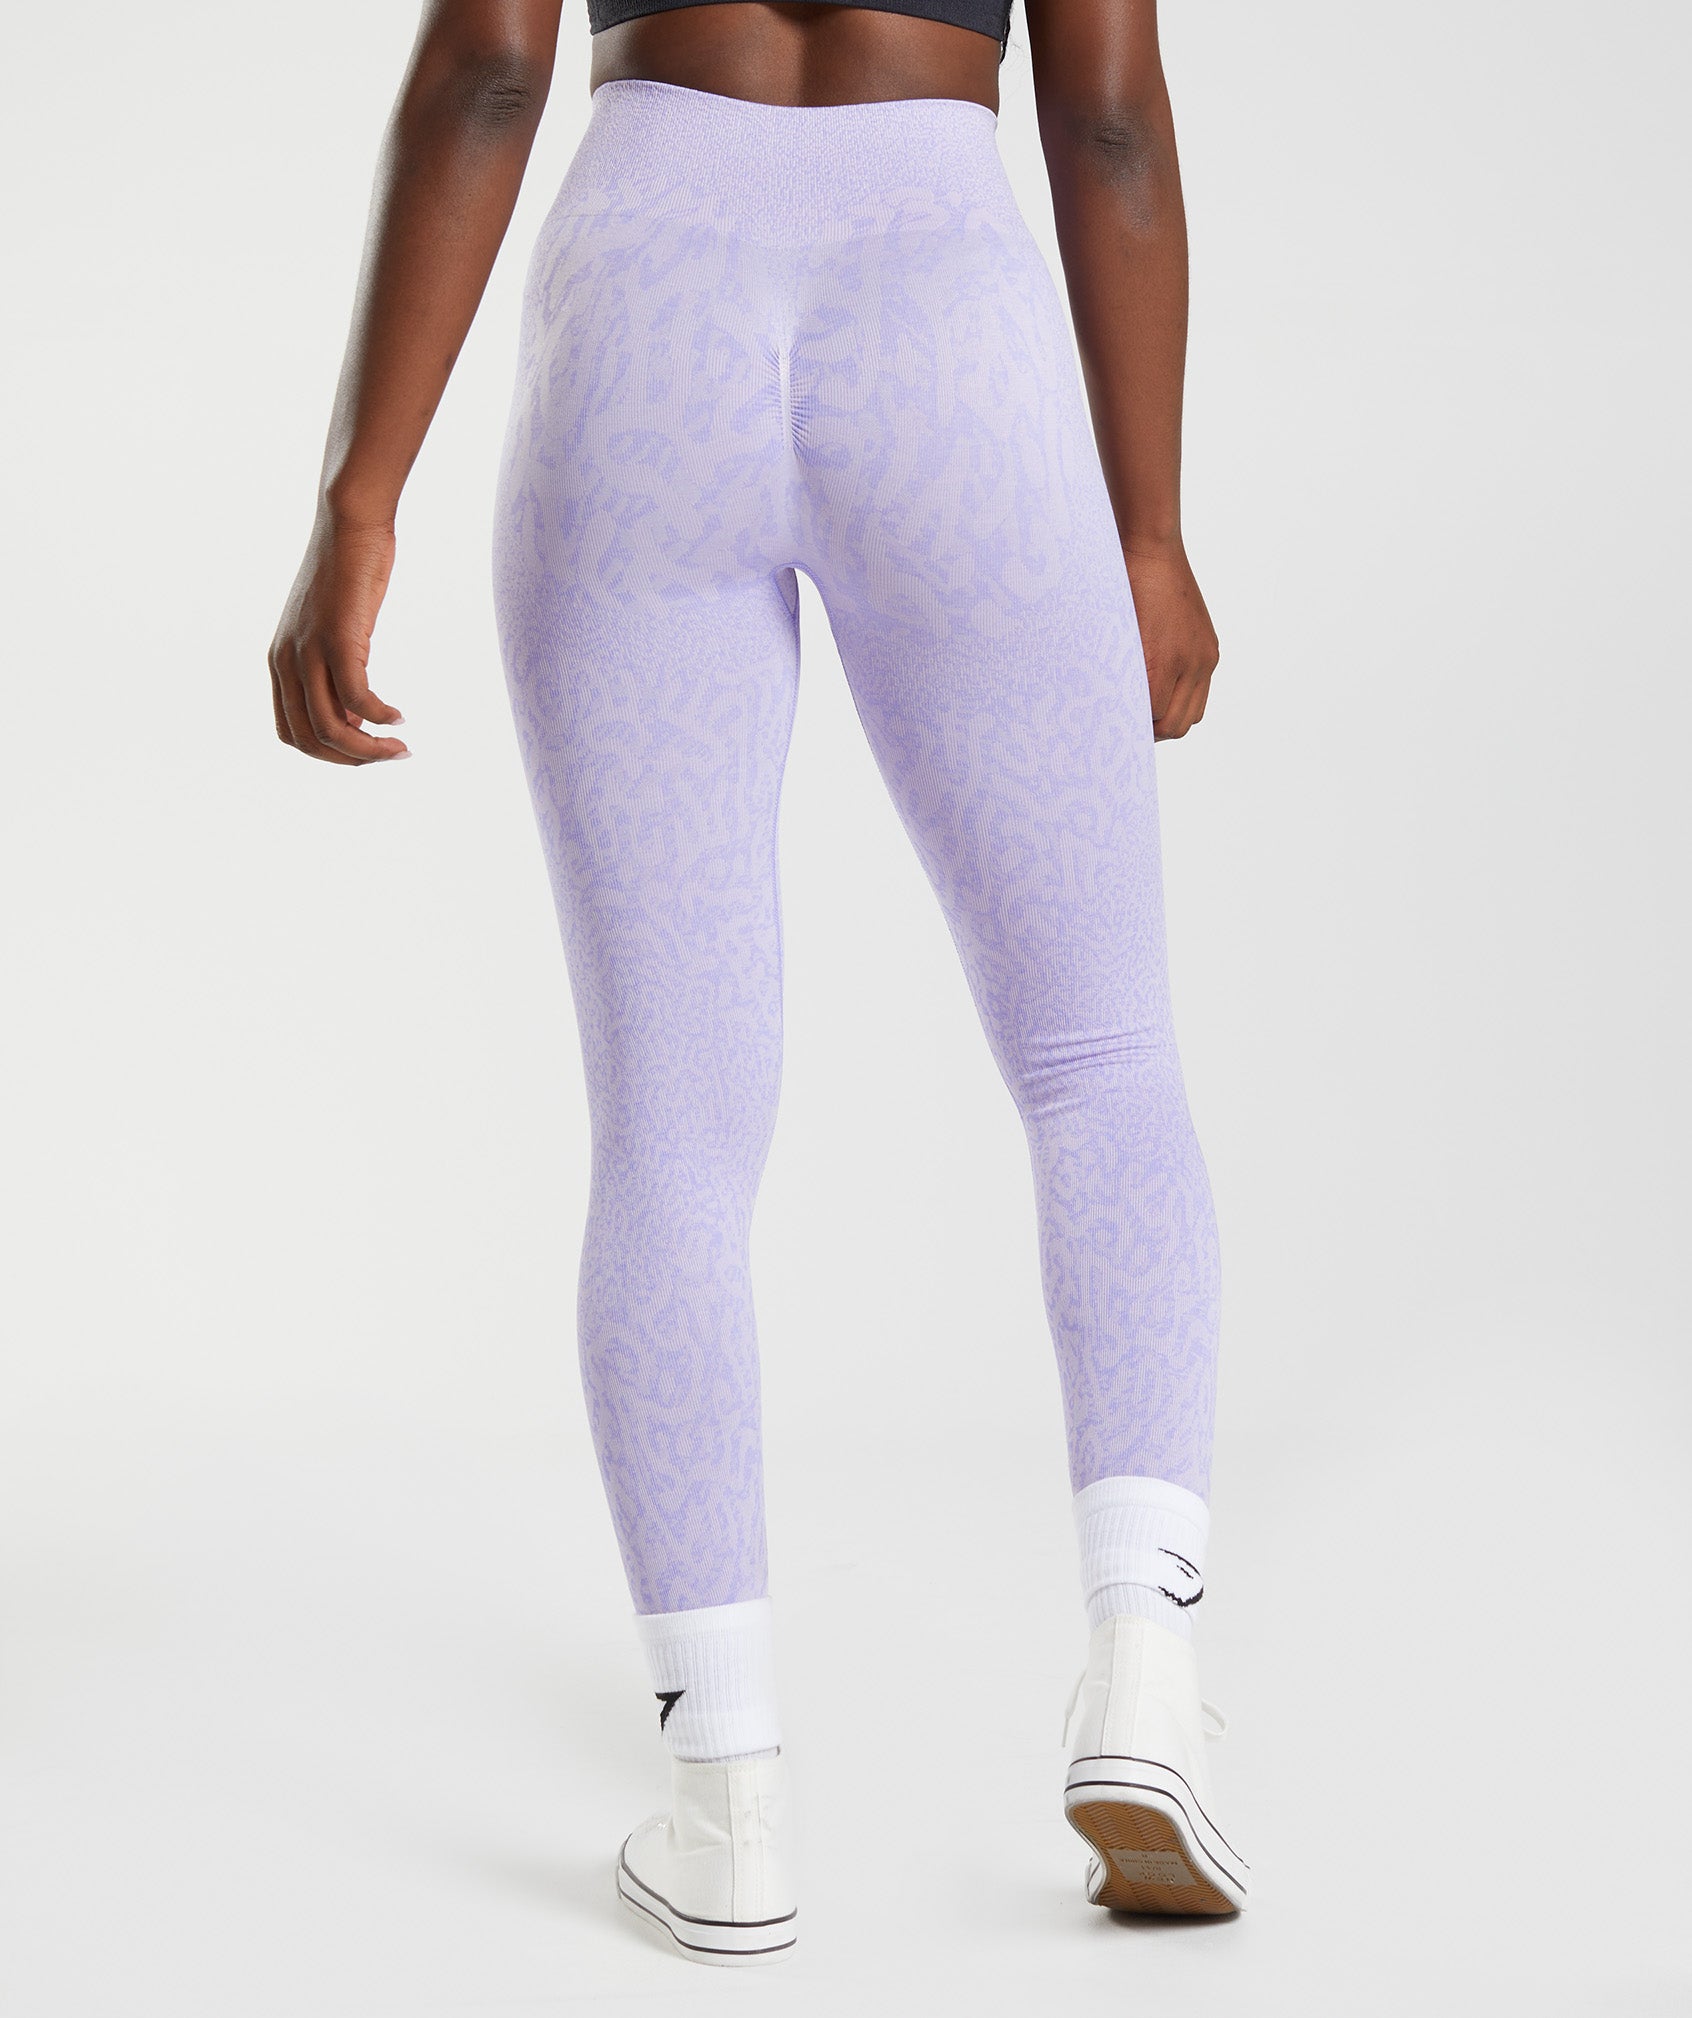 PRETTYLITTLETHING Lilac Sport Seamless Textured Leggings